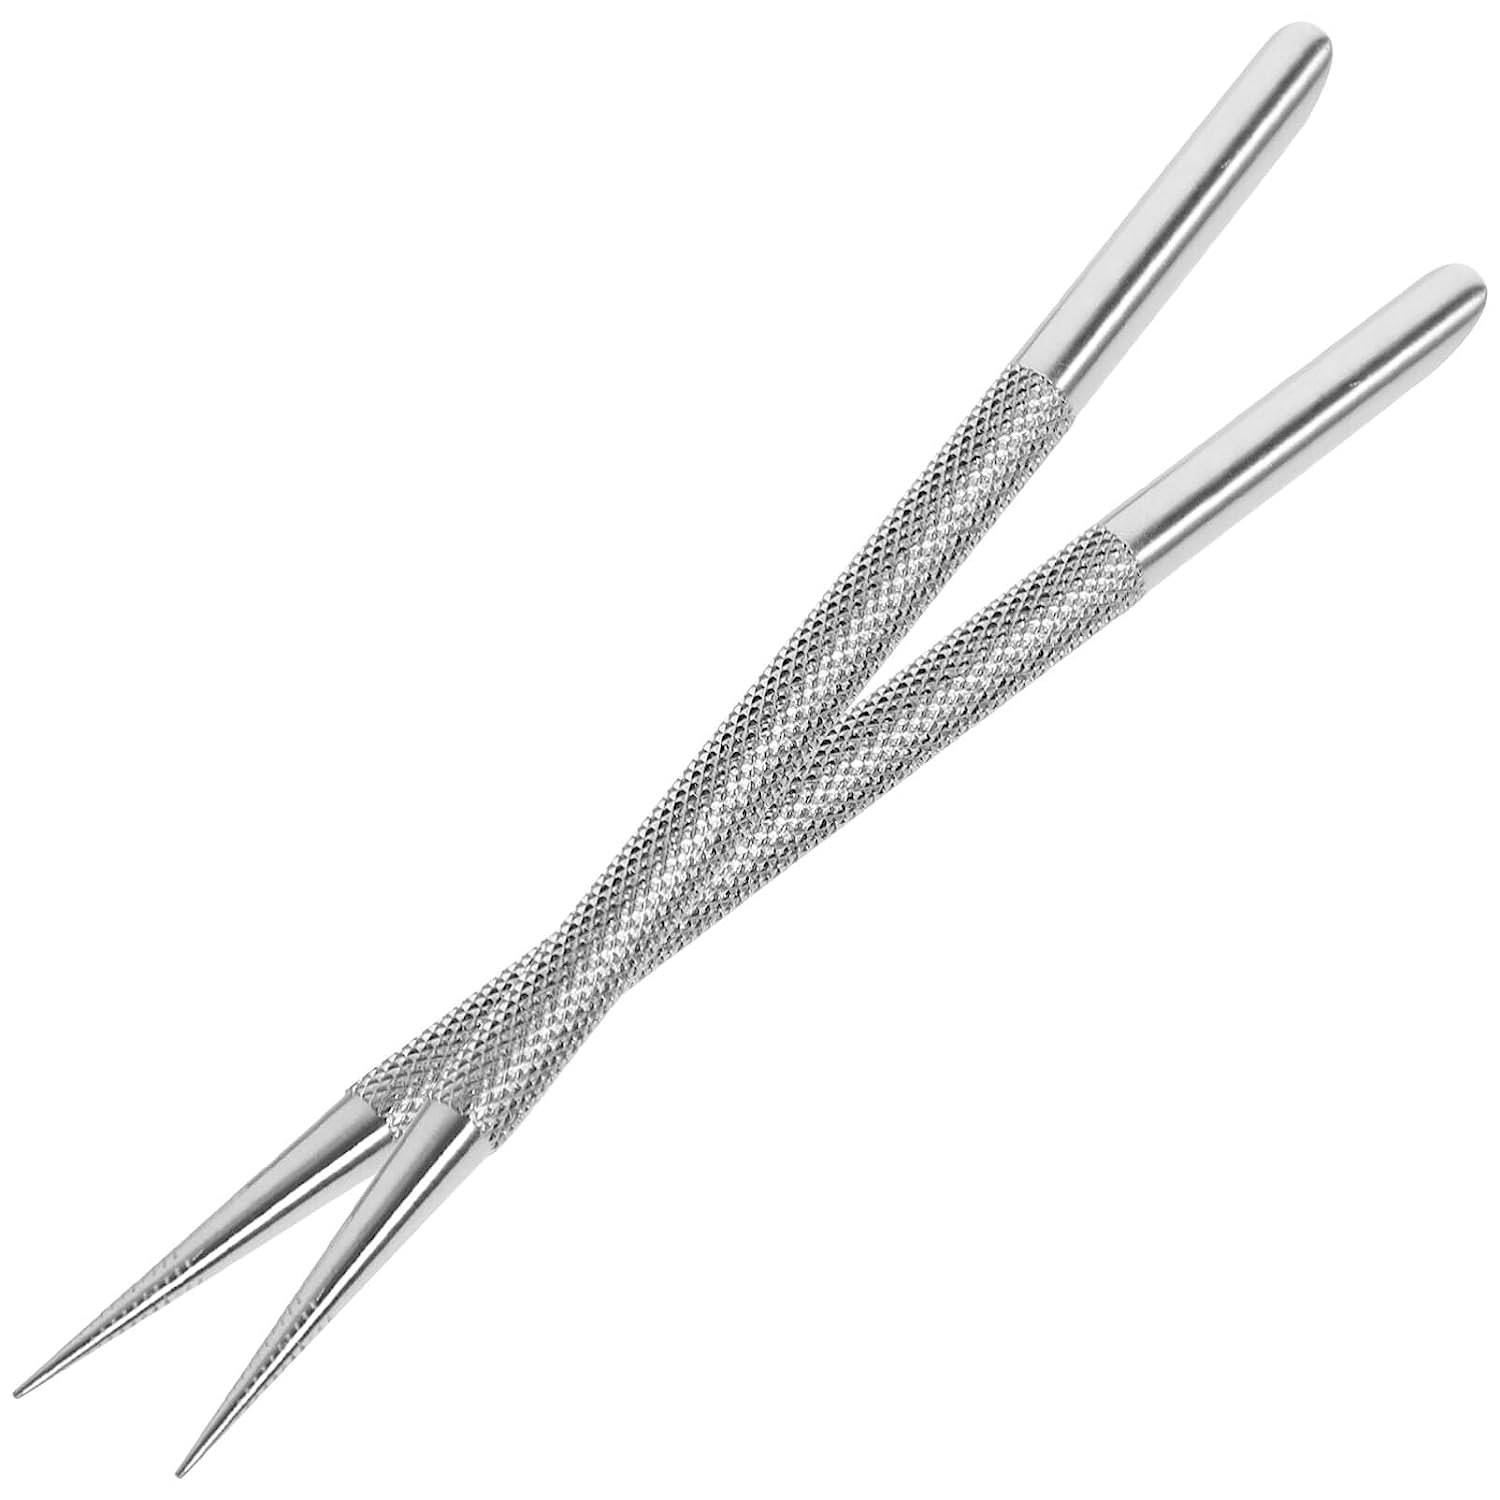 Osaladi 2 pieces of nailing slide nail point pencil stainless steel dead skin remover double-sided manicure pedicure tools for nail art care